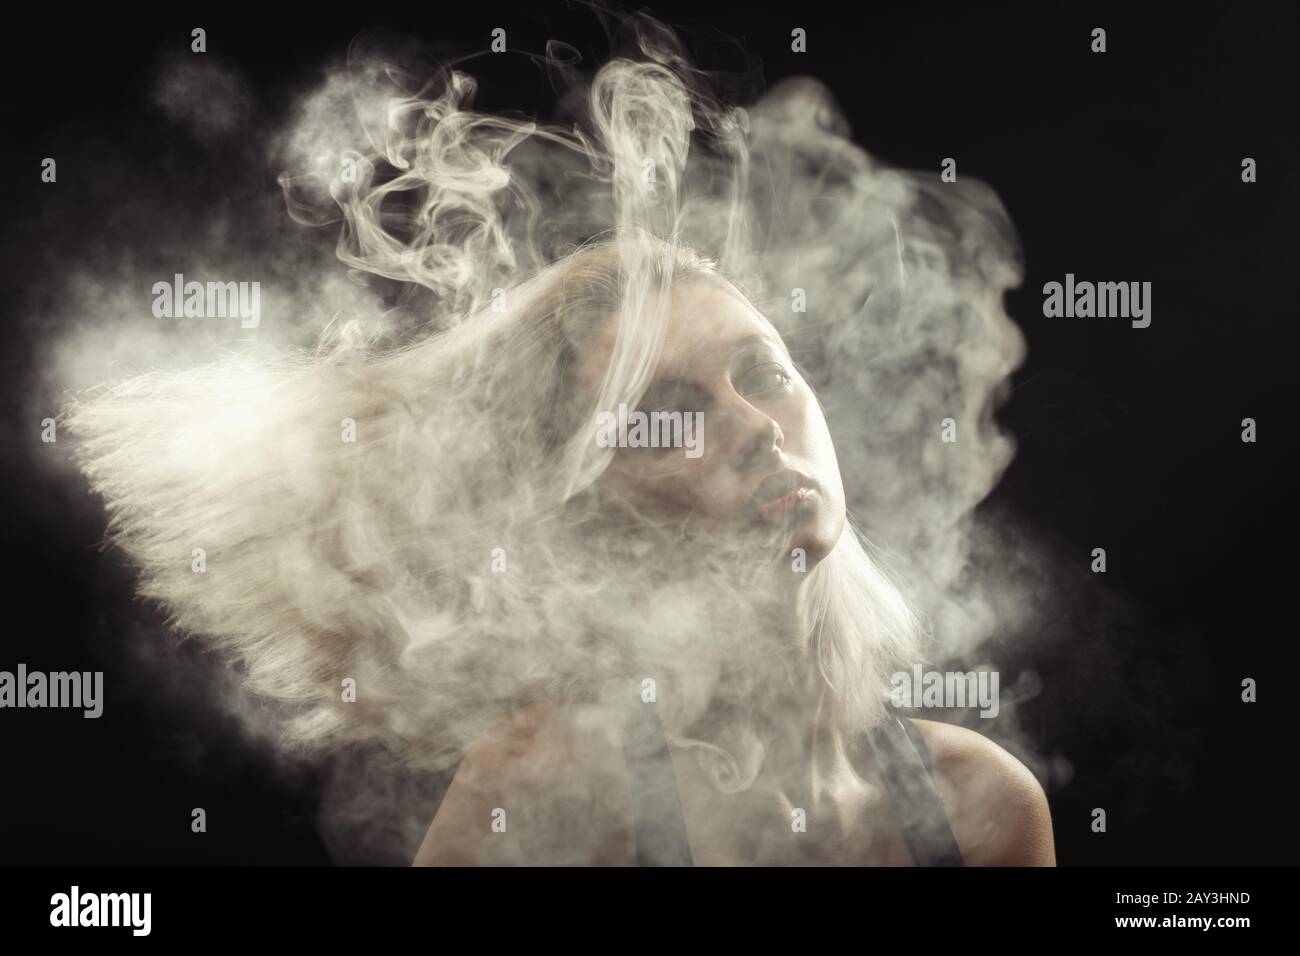 young blond woman dancing at white smoke cloud on black background Stock Photo